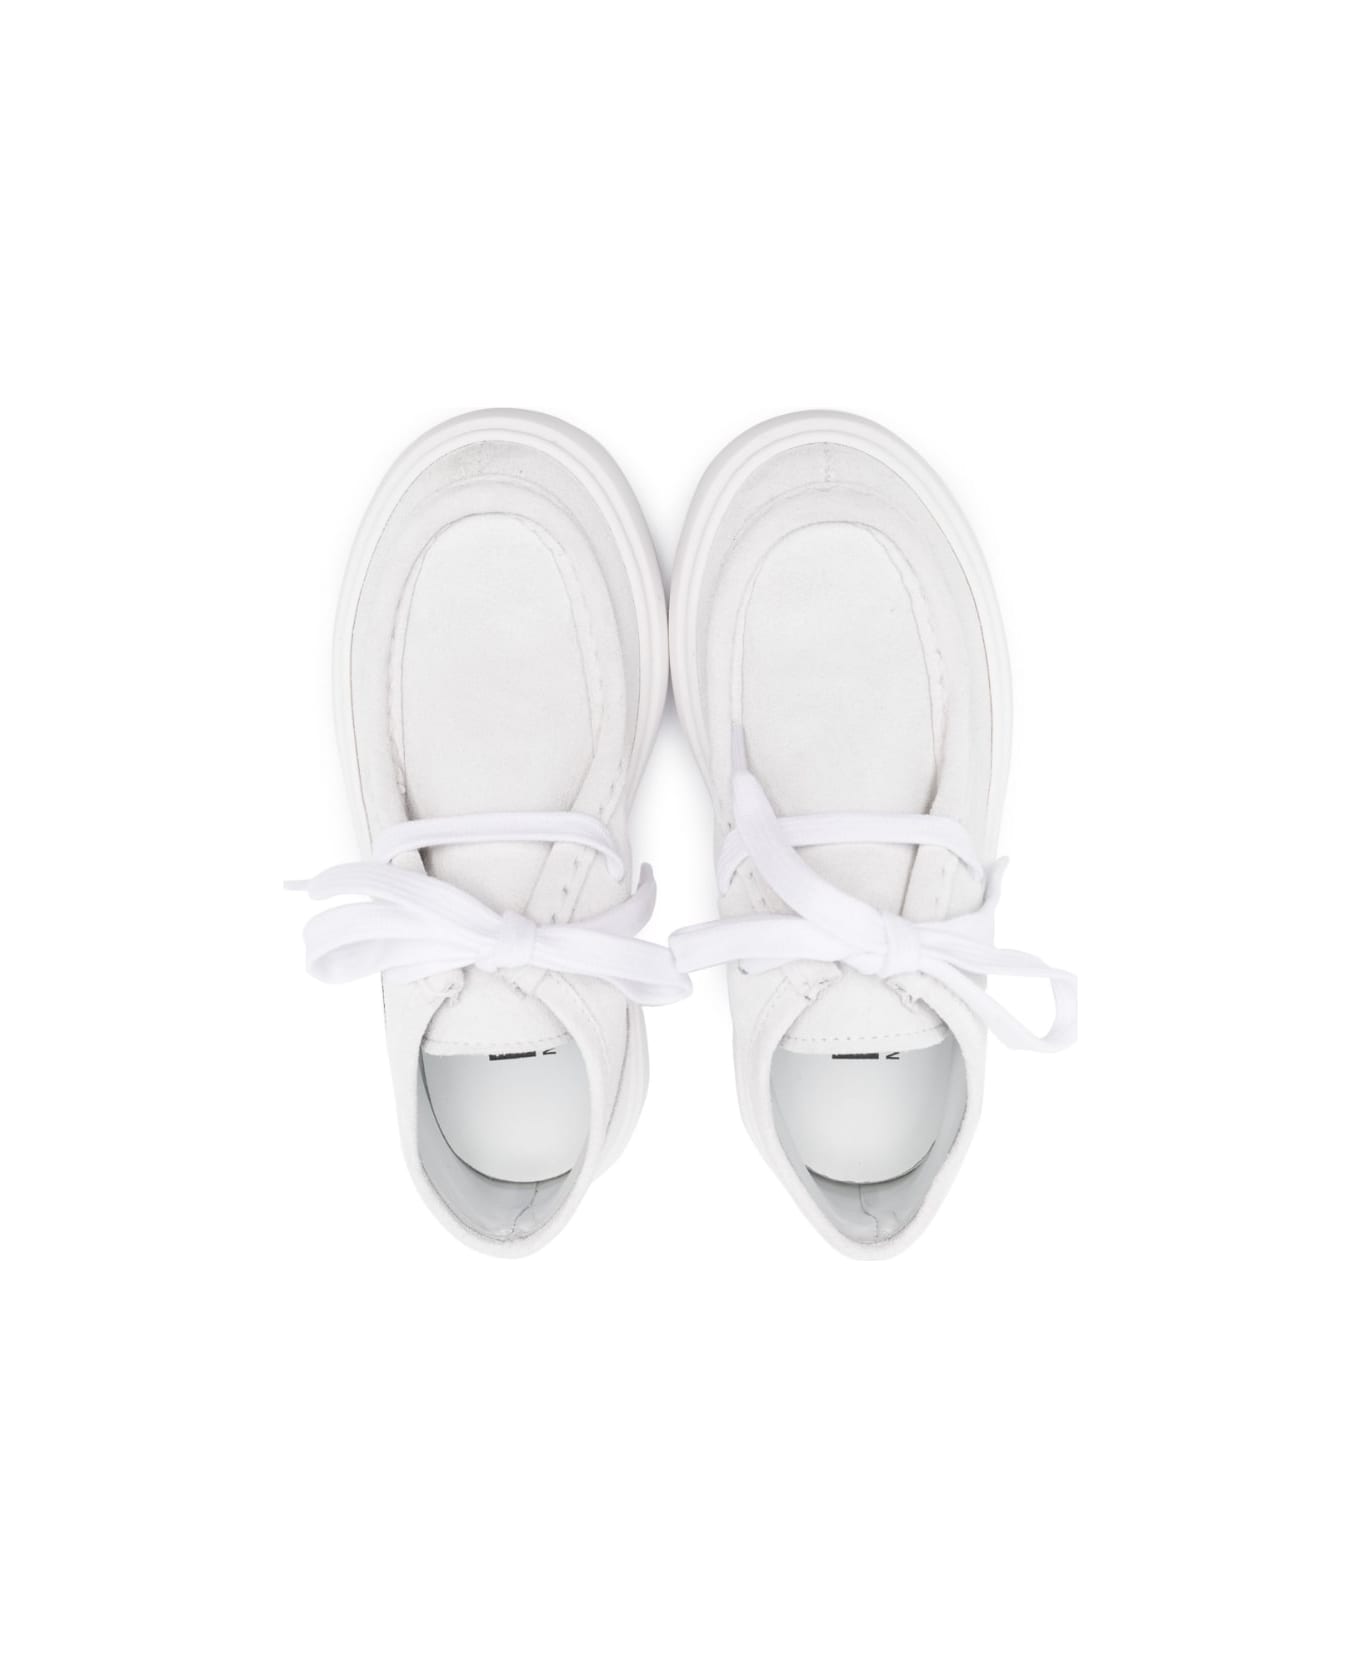 MM6 Maison Margiela Calf Leather High-top Sneakers - White シューズ